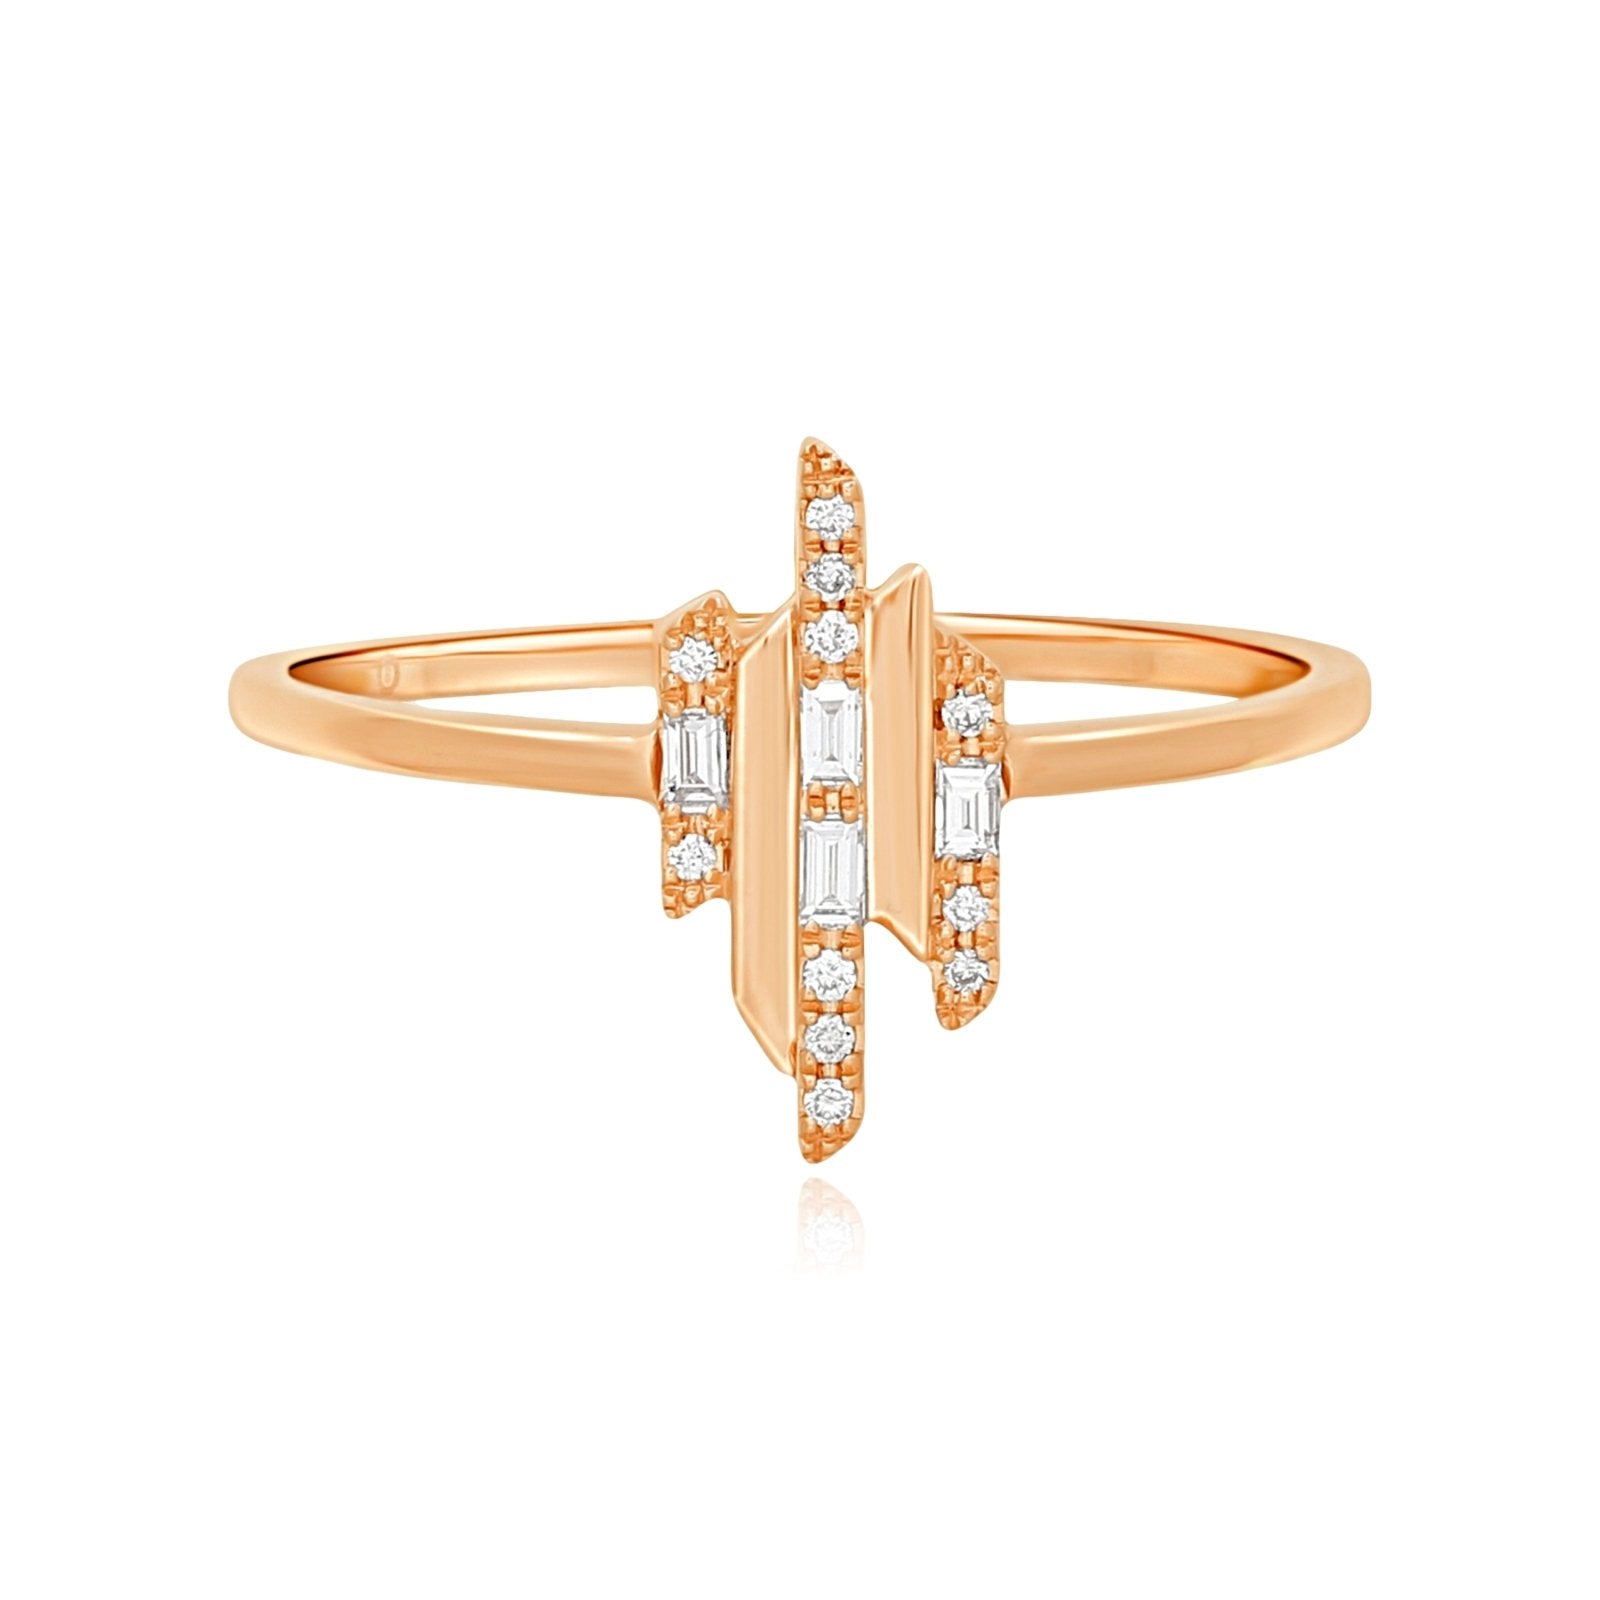 Art Deco Mixed Diamond Cocktail Ring in Solid 14k Gold Rings Estella Collection #product_description# 17519 14k Cocktail Ring Colorless Gemstone #tag4# #tag5# #tag6# #tag7# #tag8# #tag9# #tag10# 14K Rose Gold 6